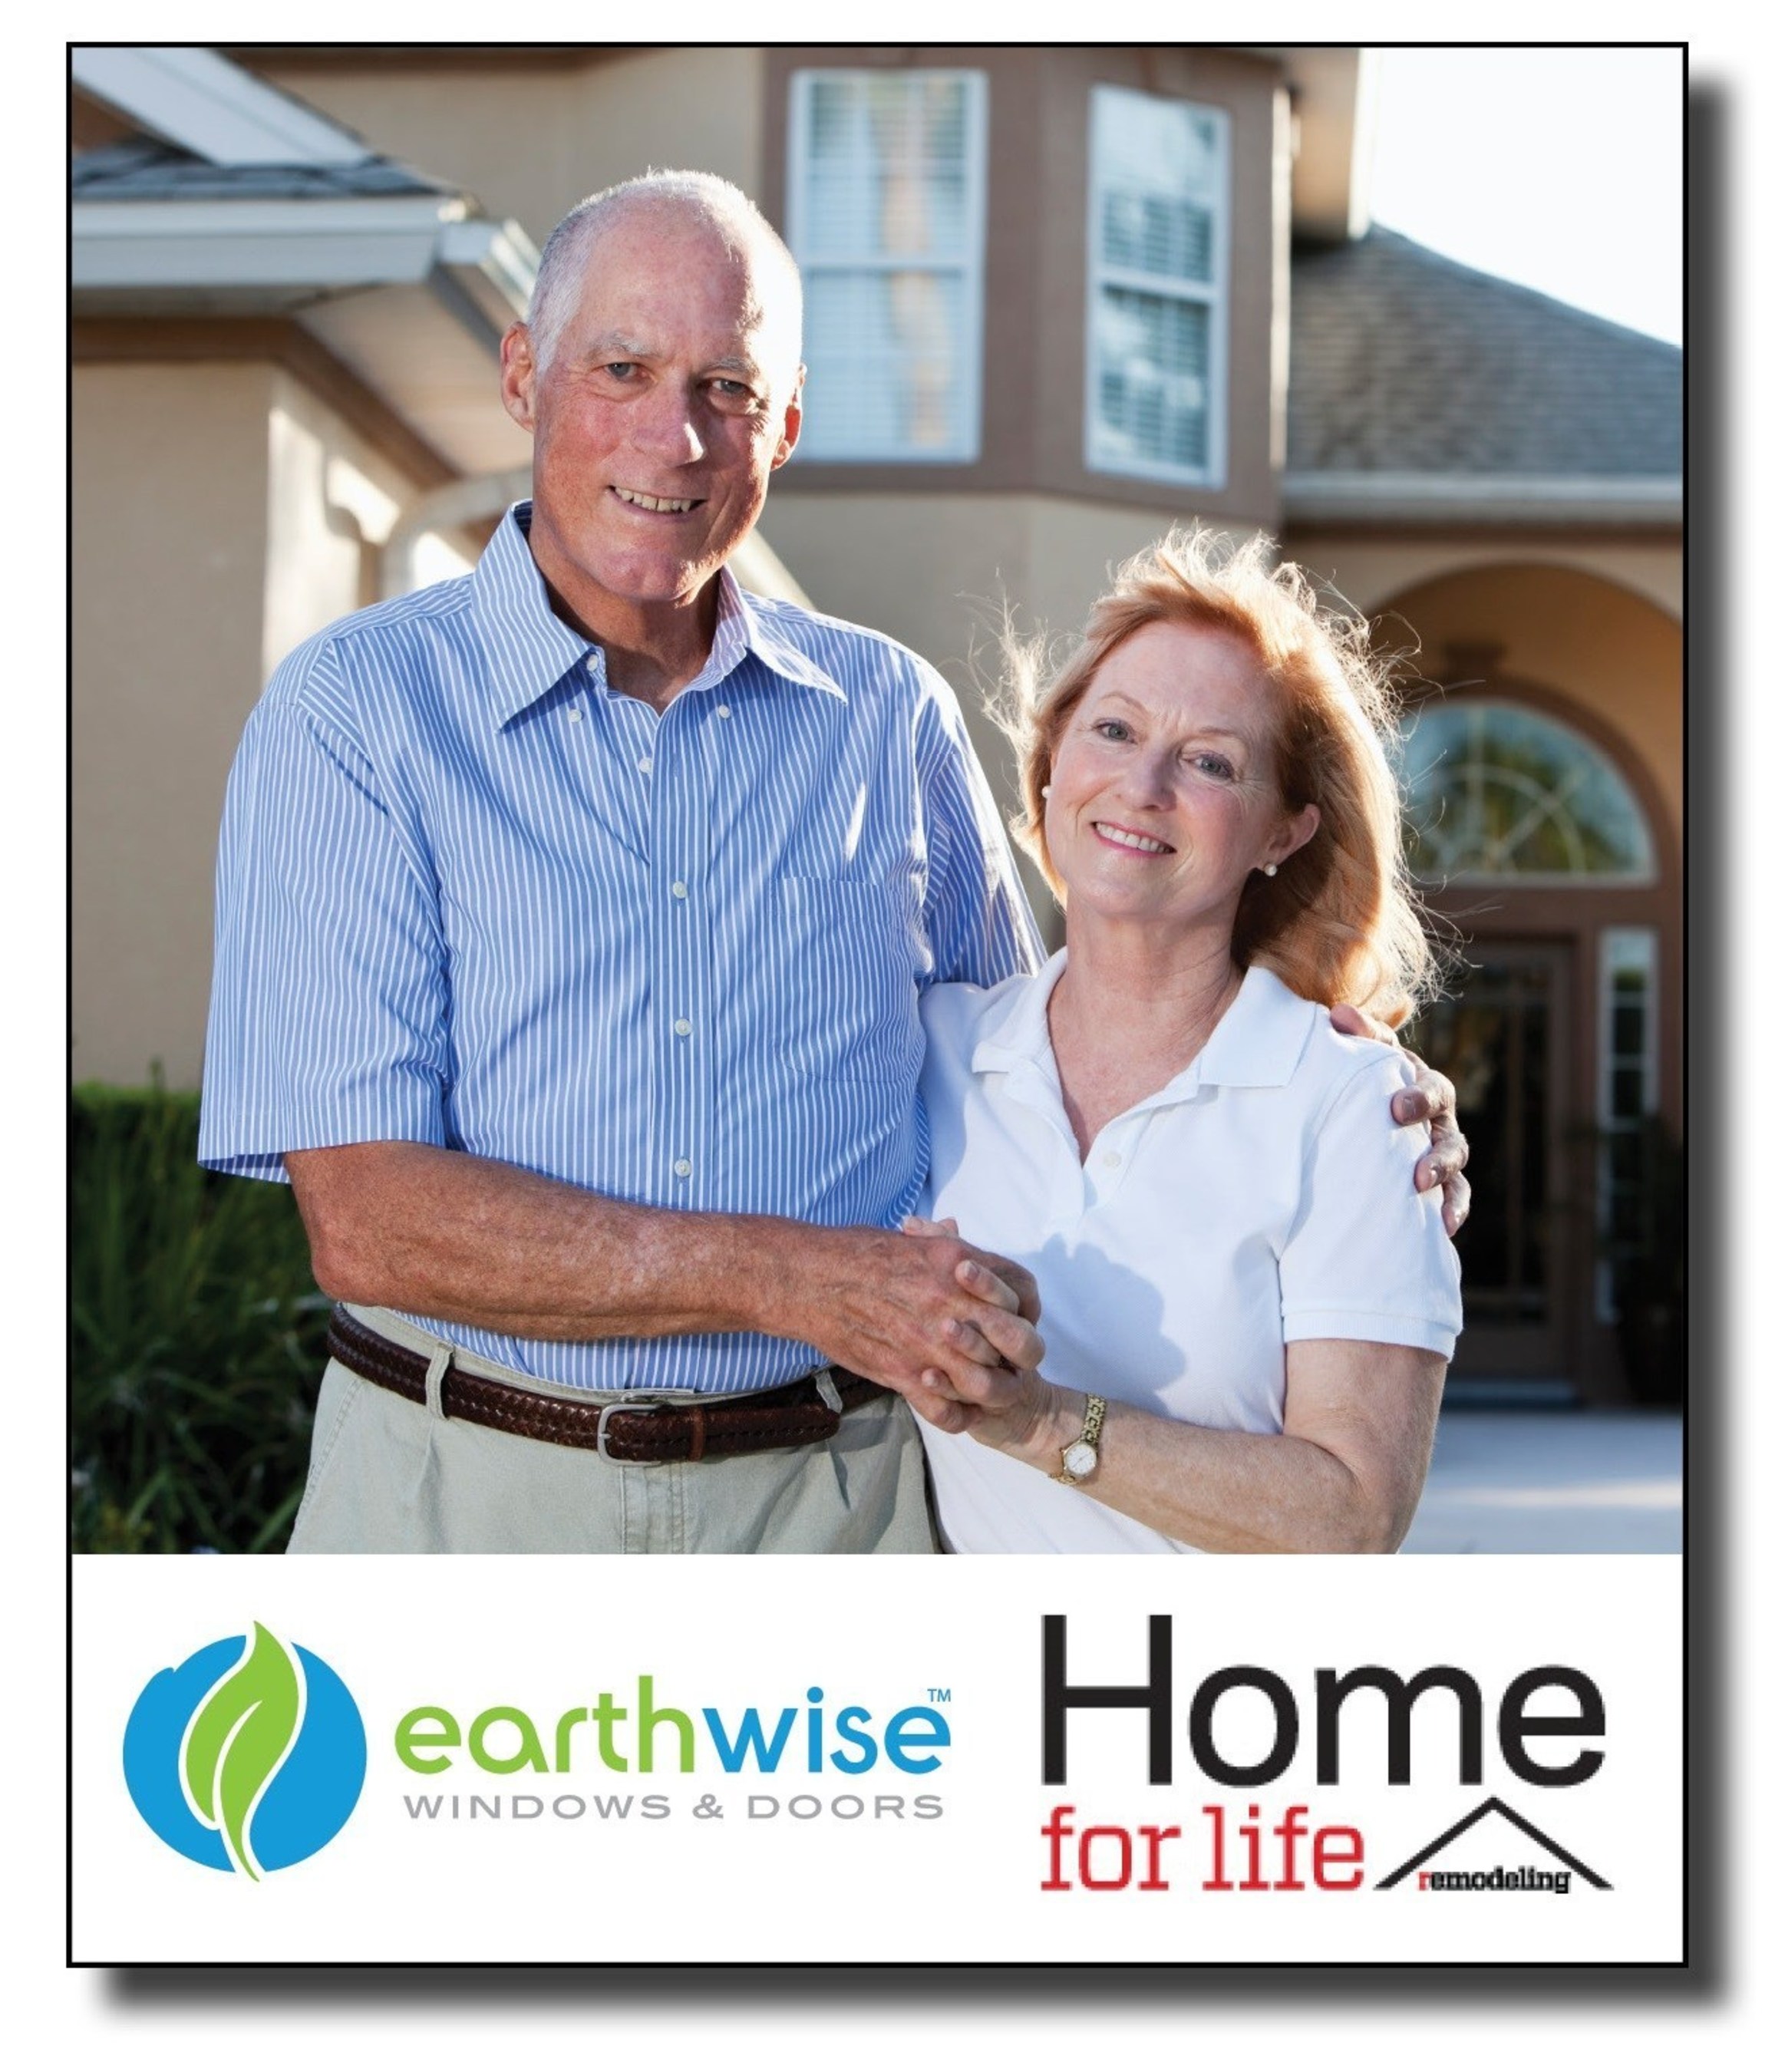 Earthwise Windows & Doors sponsors Home-For-Life with design options for aging in place.